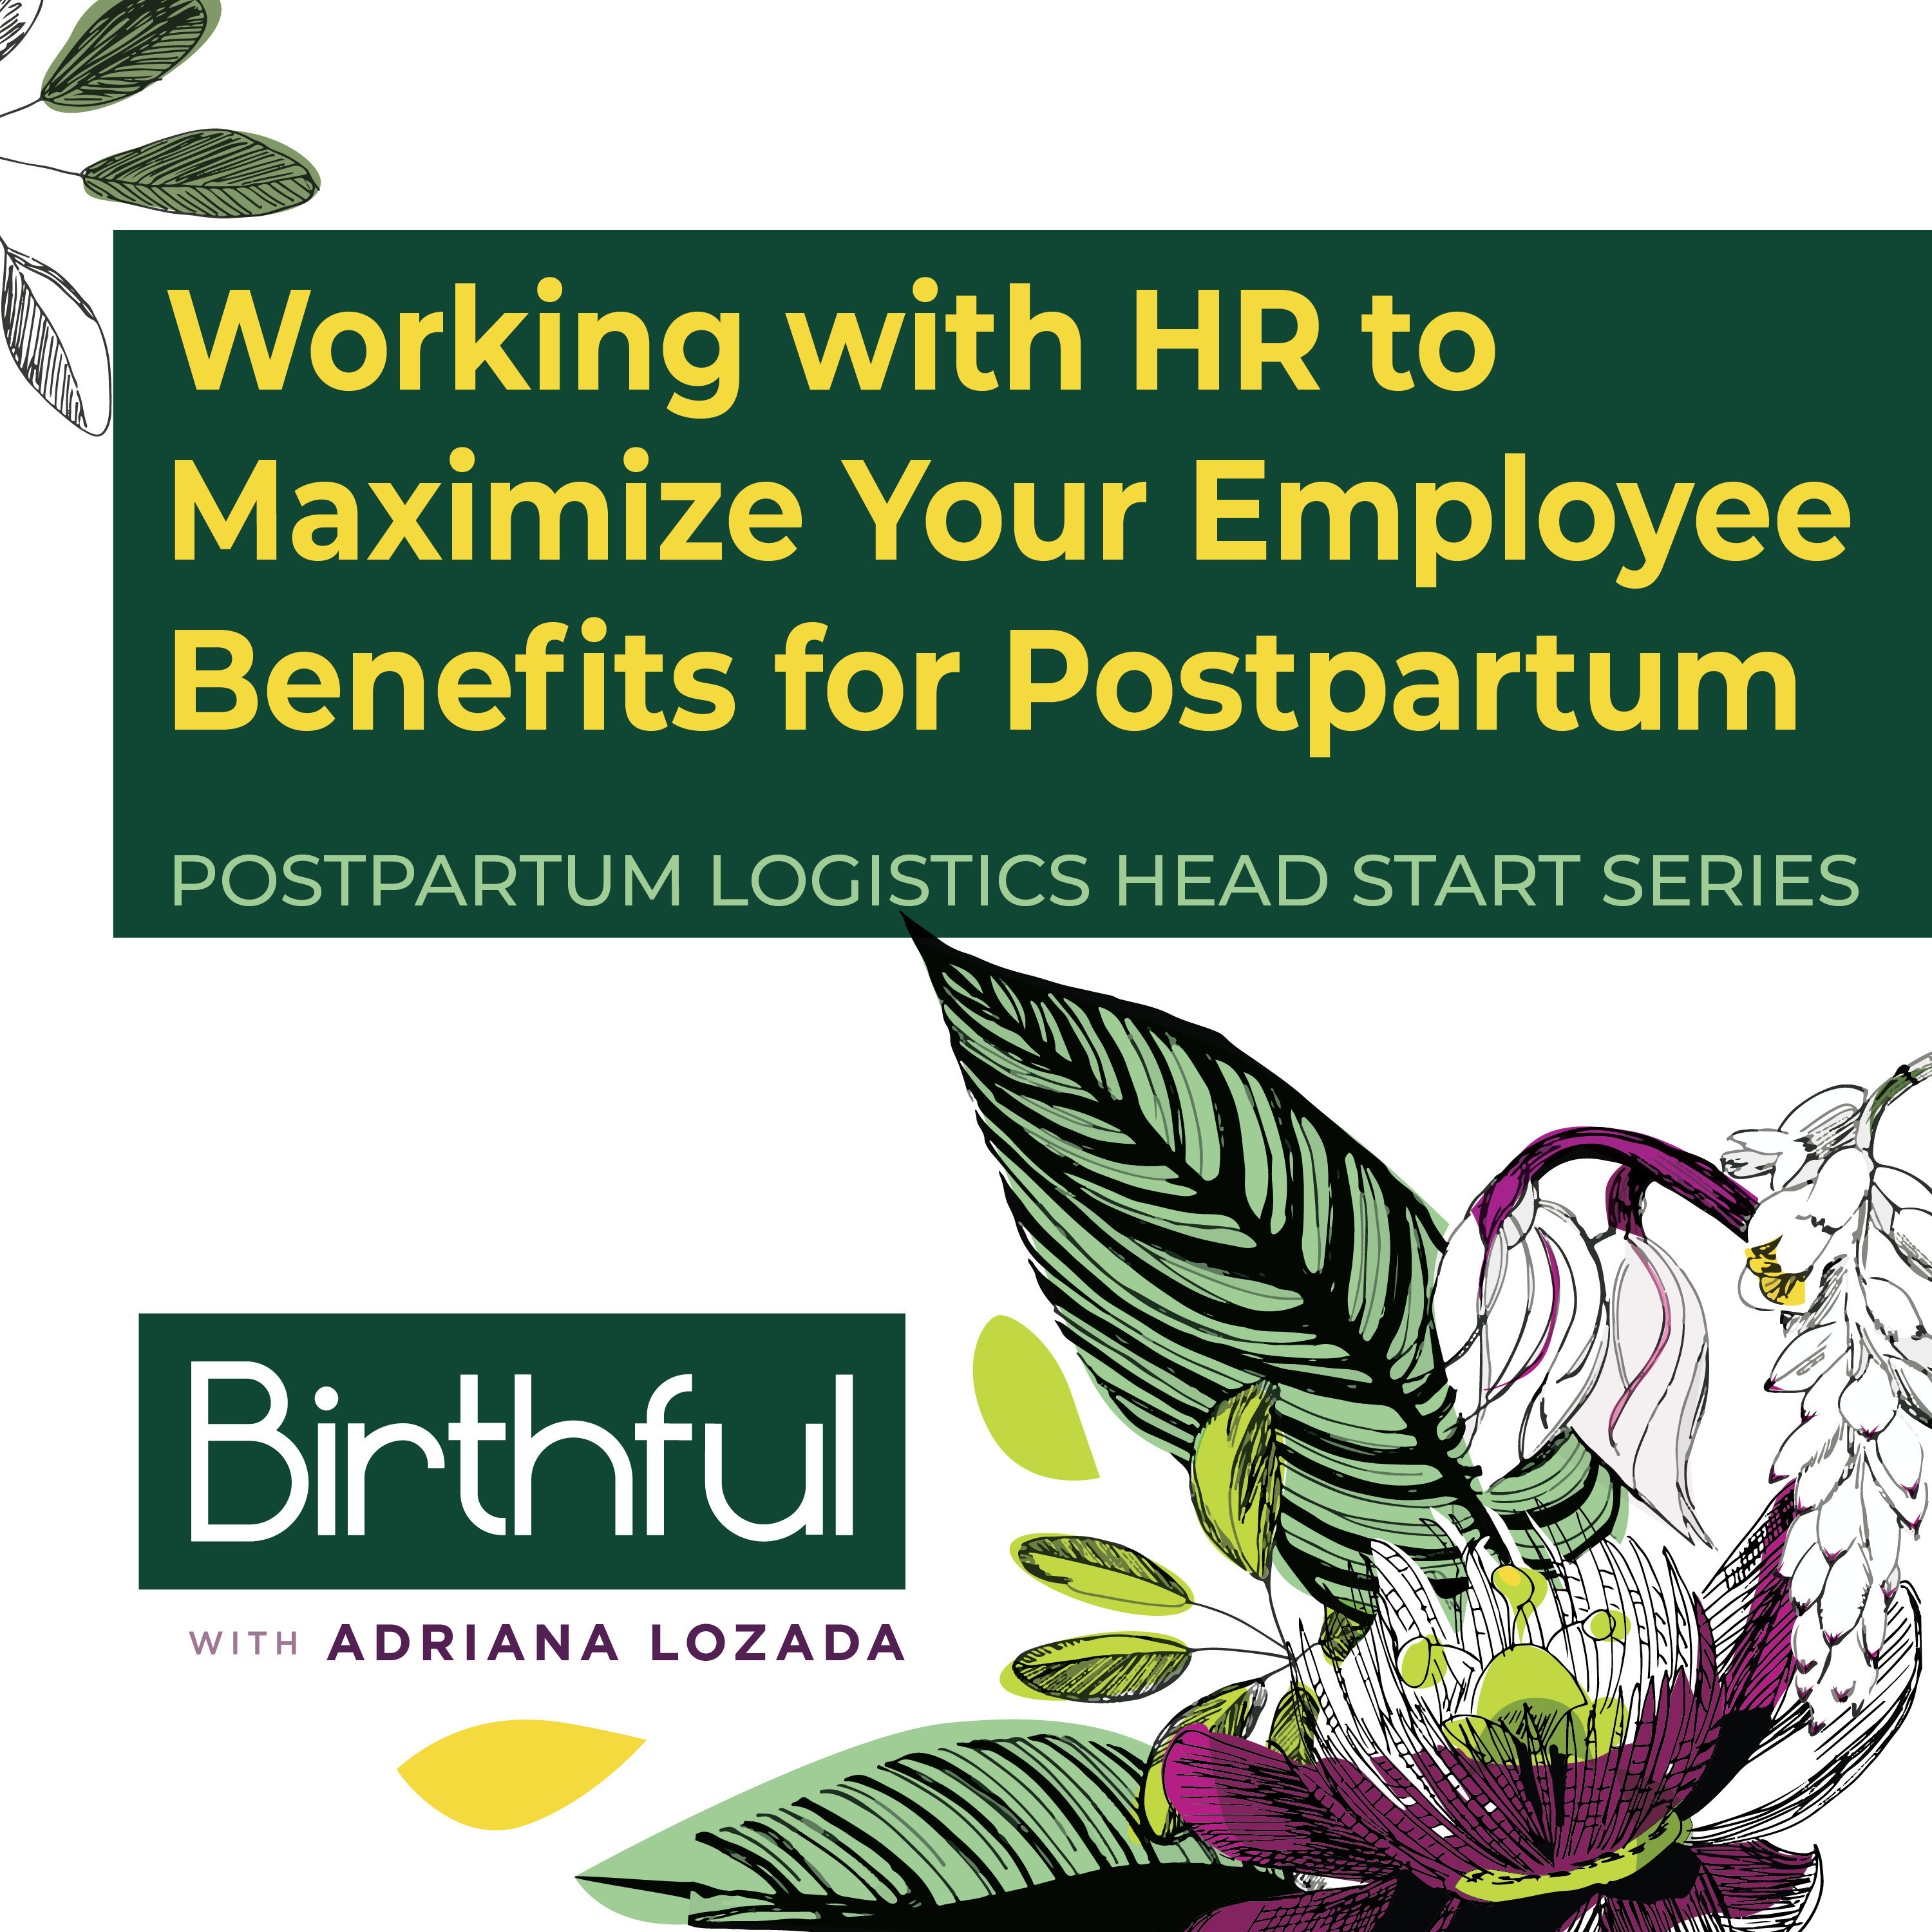 Working with HR to Maximize Your Employee Benefits for Postpartum